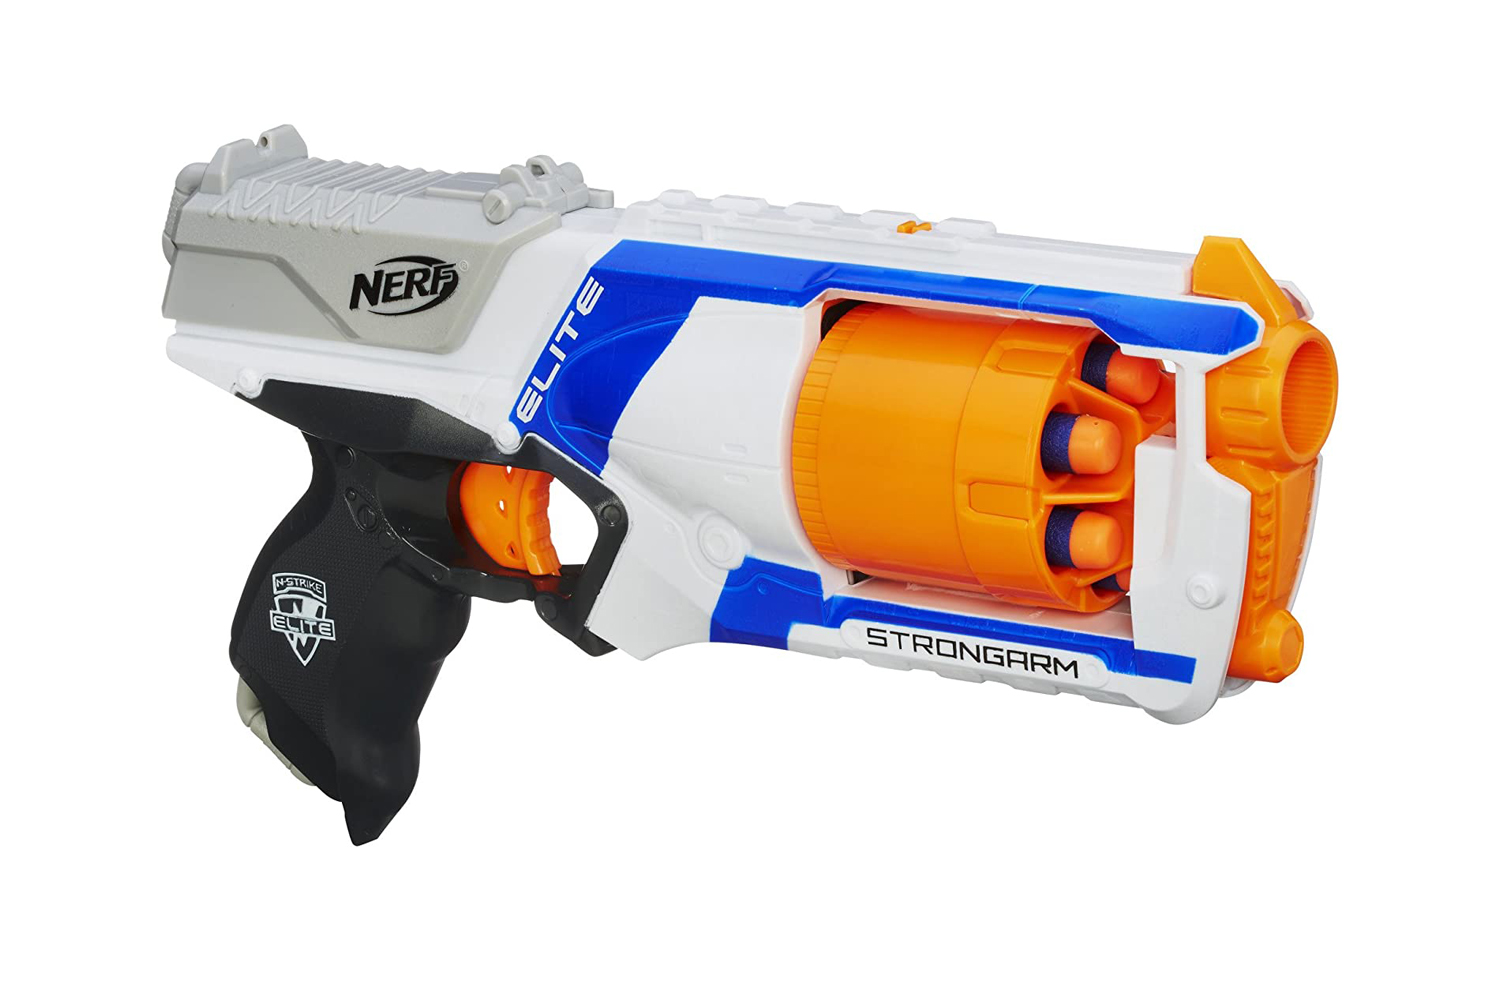 tale bred Tilsyneladende Unleash your inner child with these amusing Nerf guns - The Manual